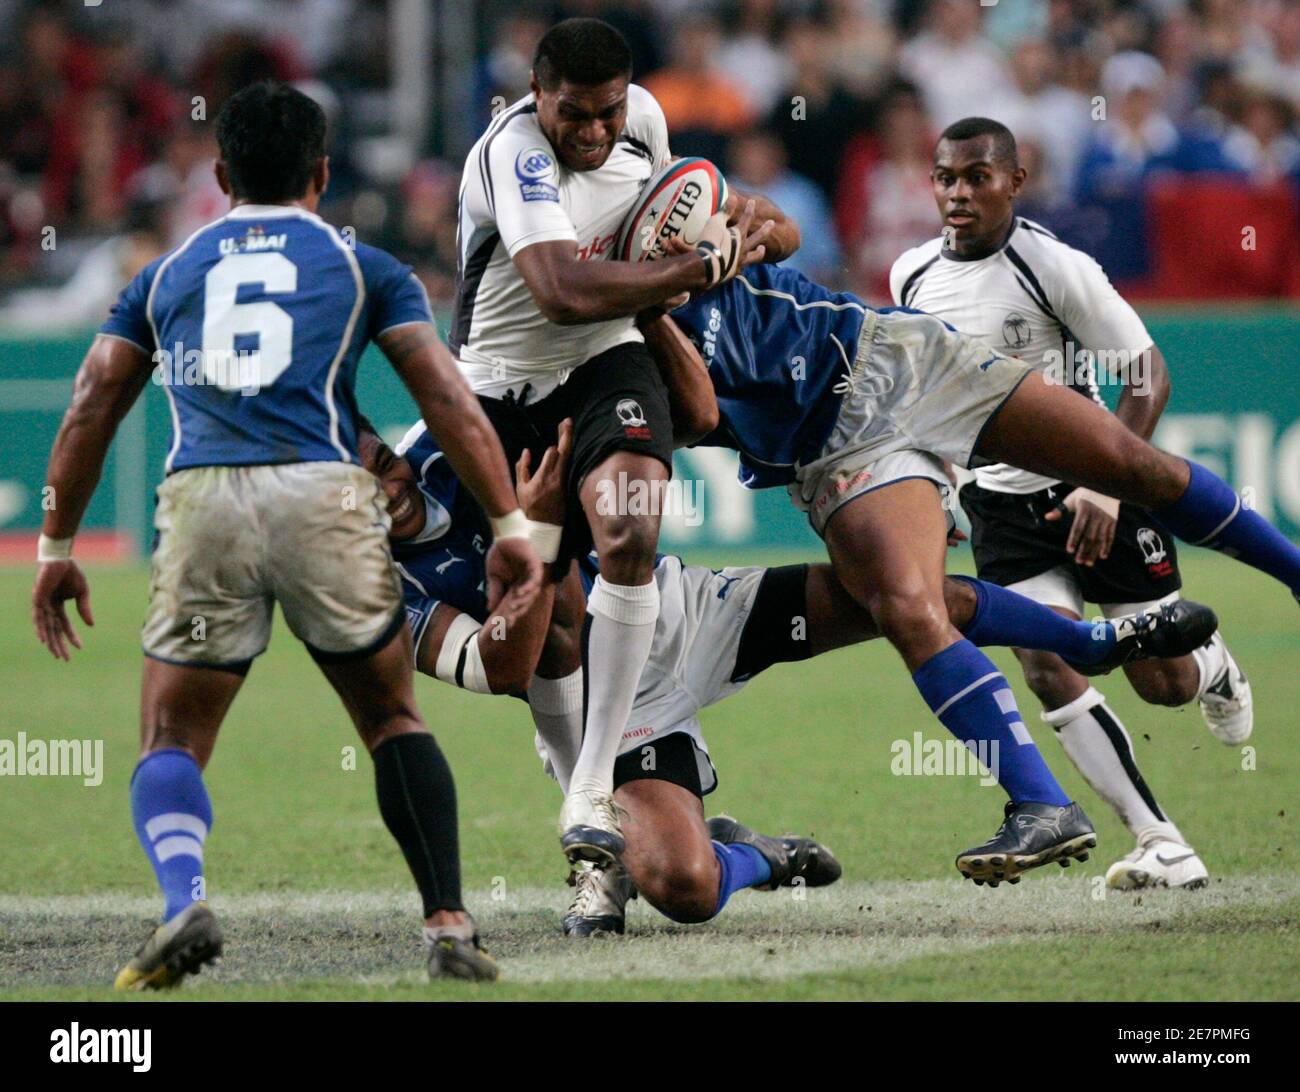 Fiji's Etonia Naba (C) is tackled by Samoa's Ofisa Treviranus (R) during the Cup final of the Hong Kong Sevens rugby tournament in Hong Kong April 1, 2007.   REUTERS/Paul Yeung  (CHINA) Stock Photo